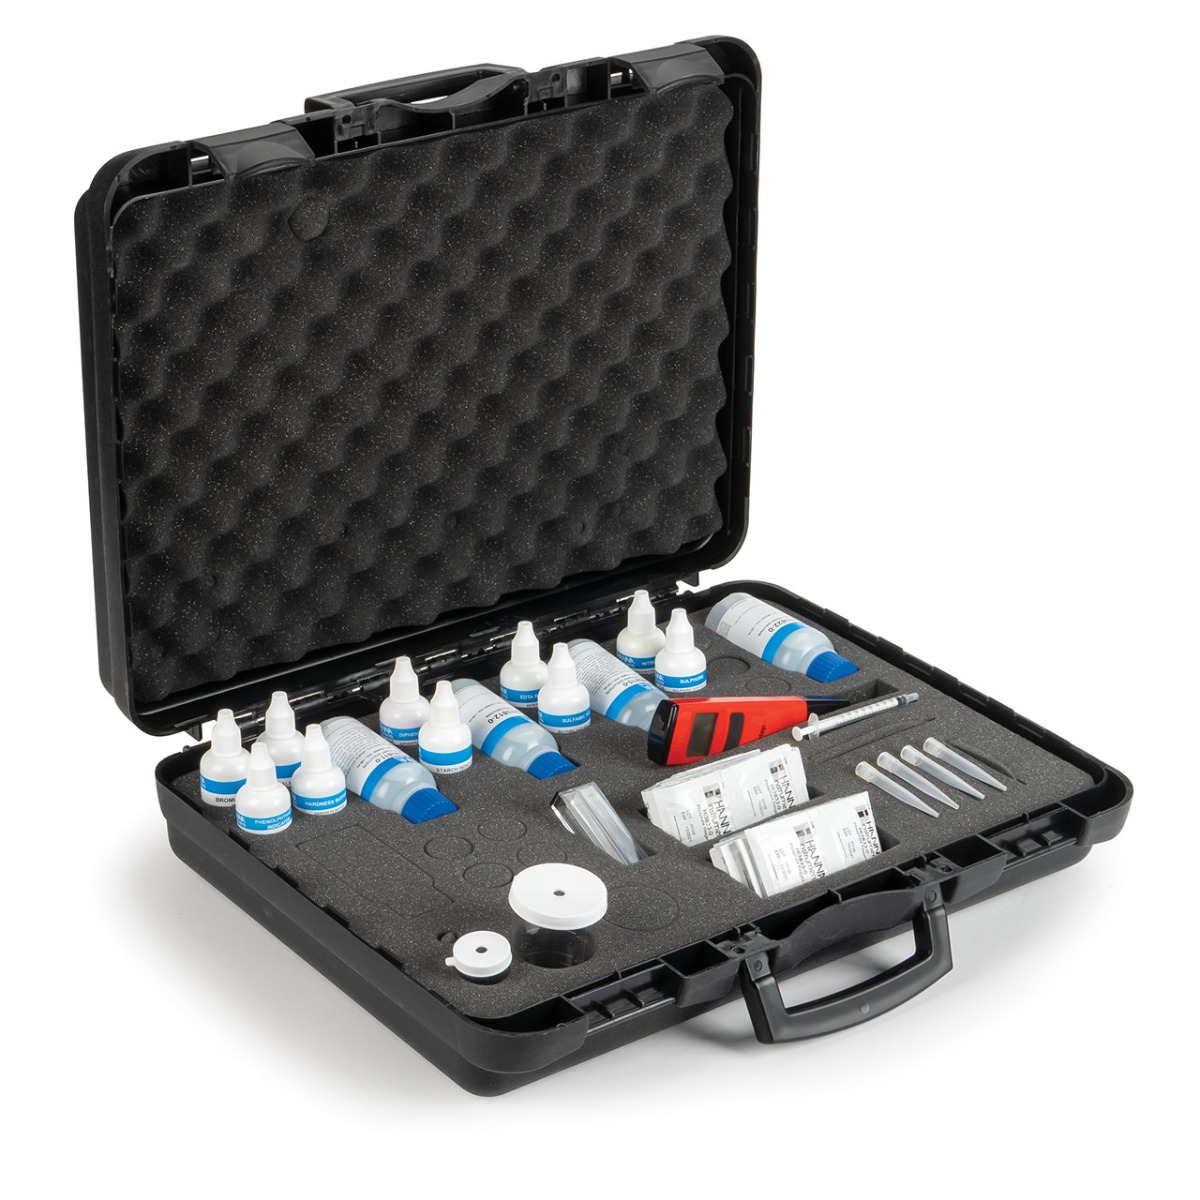 HI3827 Boiler and Feedwater Chemical Test Kit